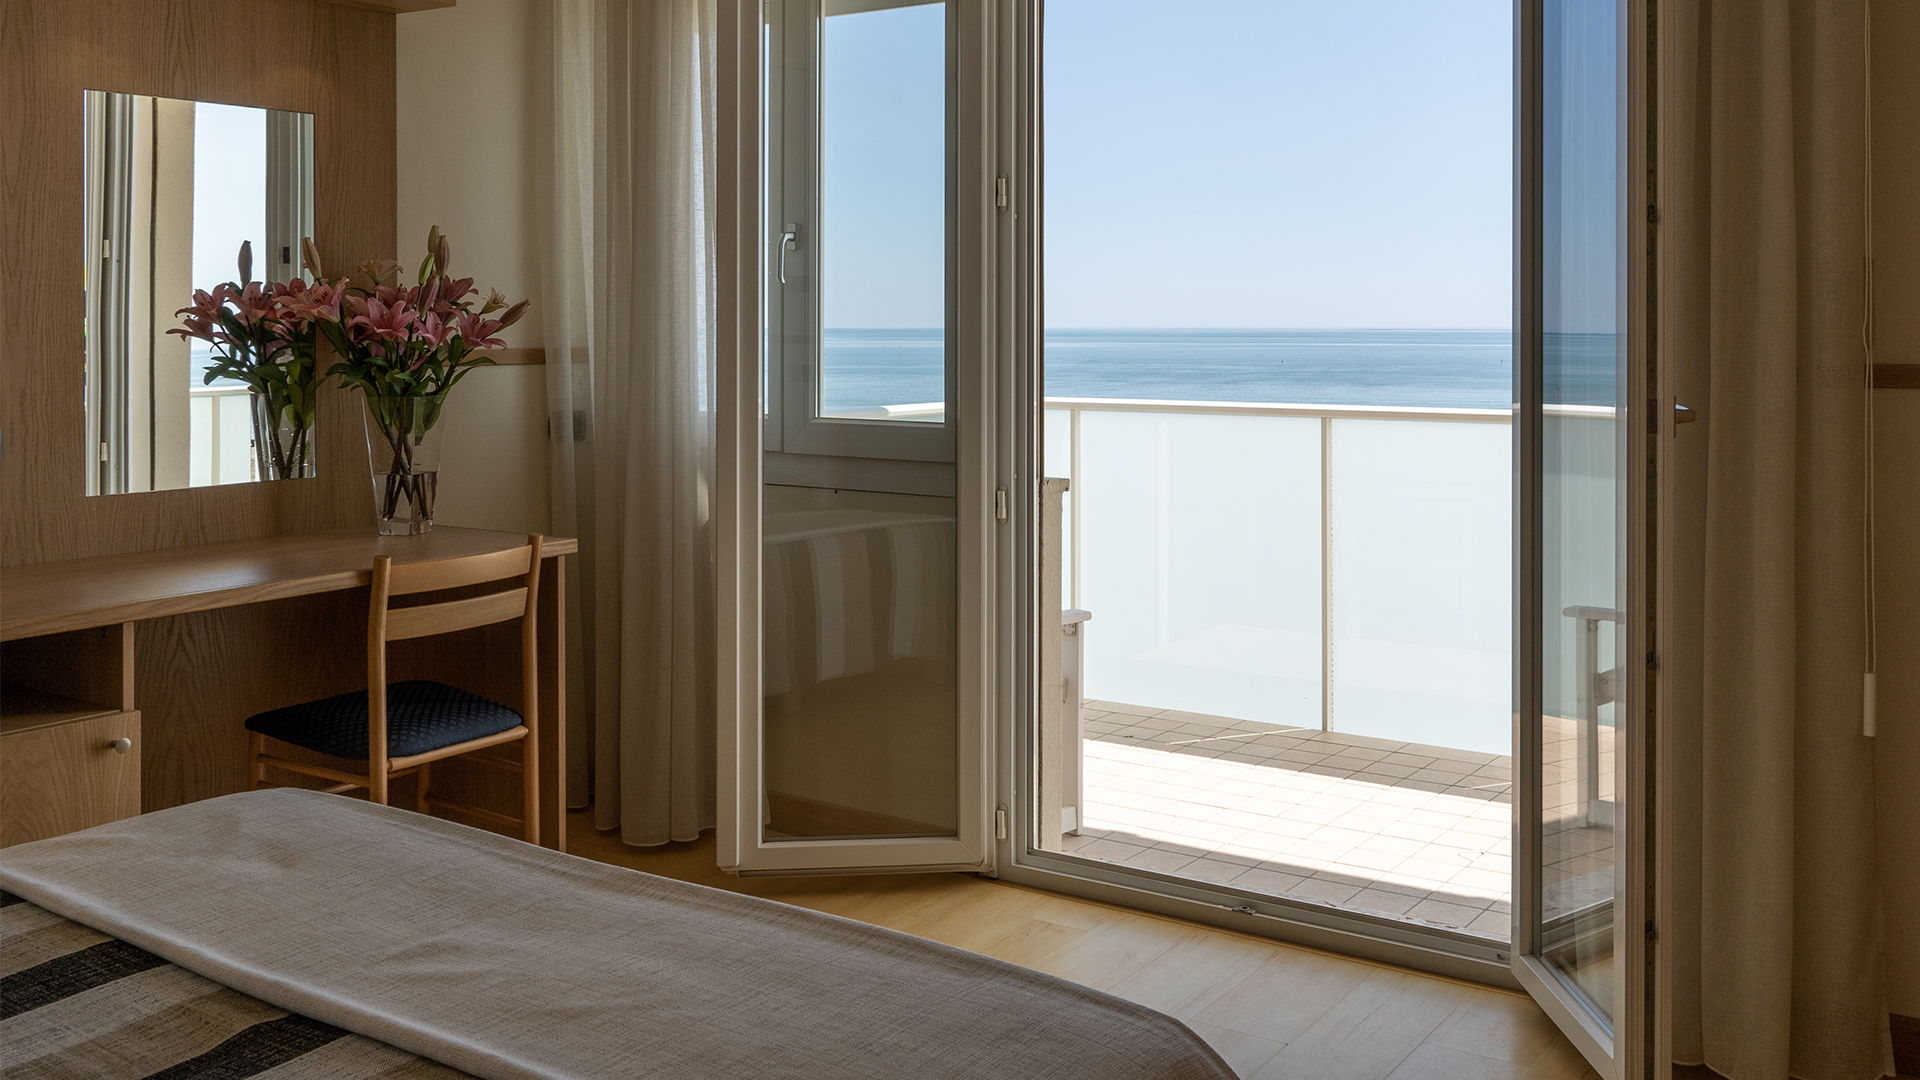 Three-bedded room with front sea view